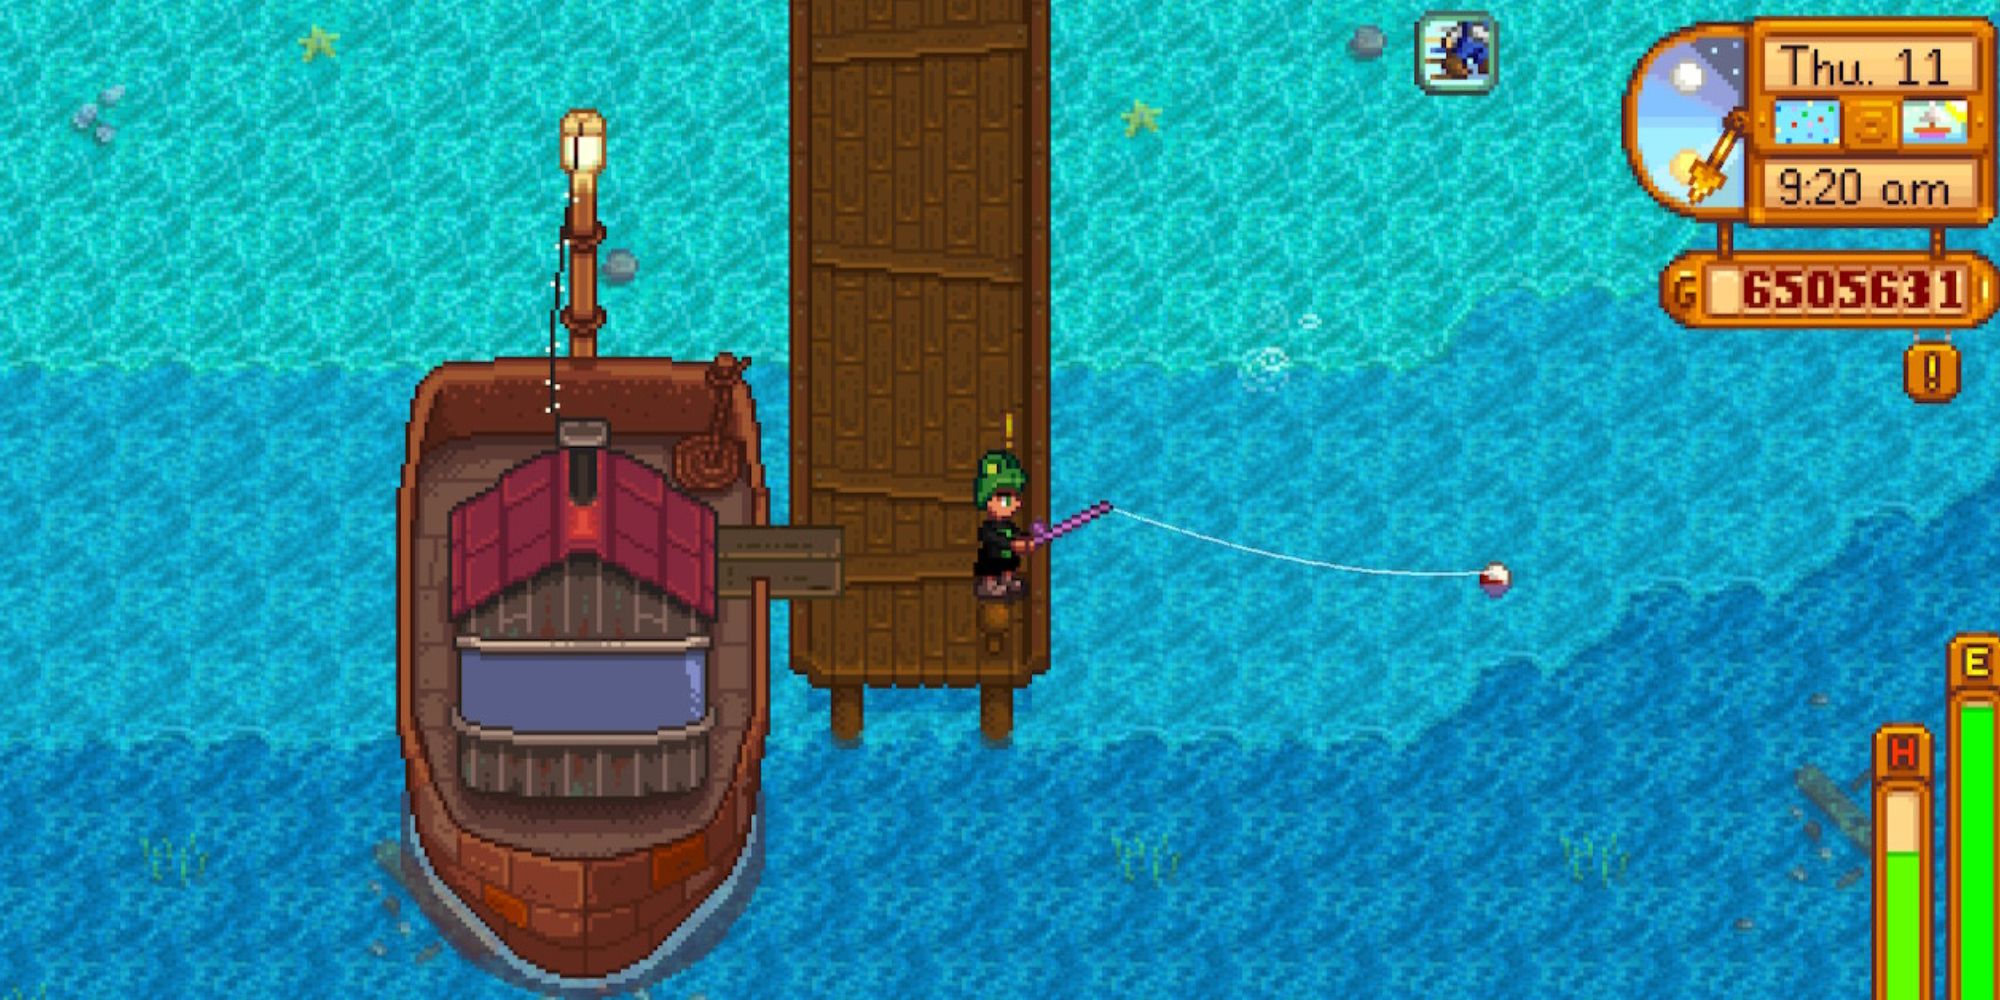  Fishing off Ginger Island in Stardew Valley